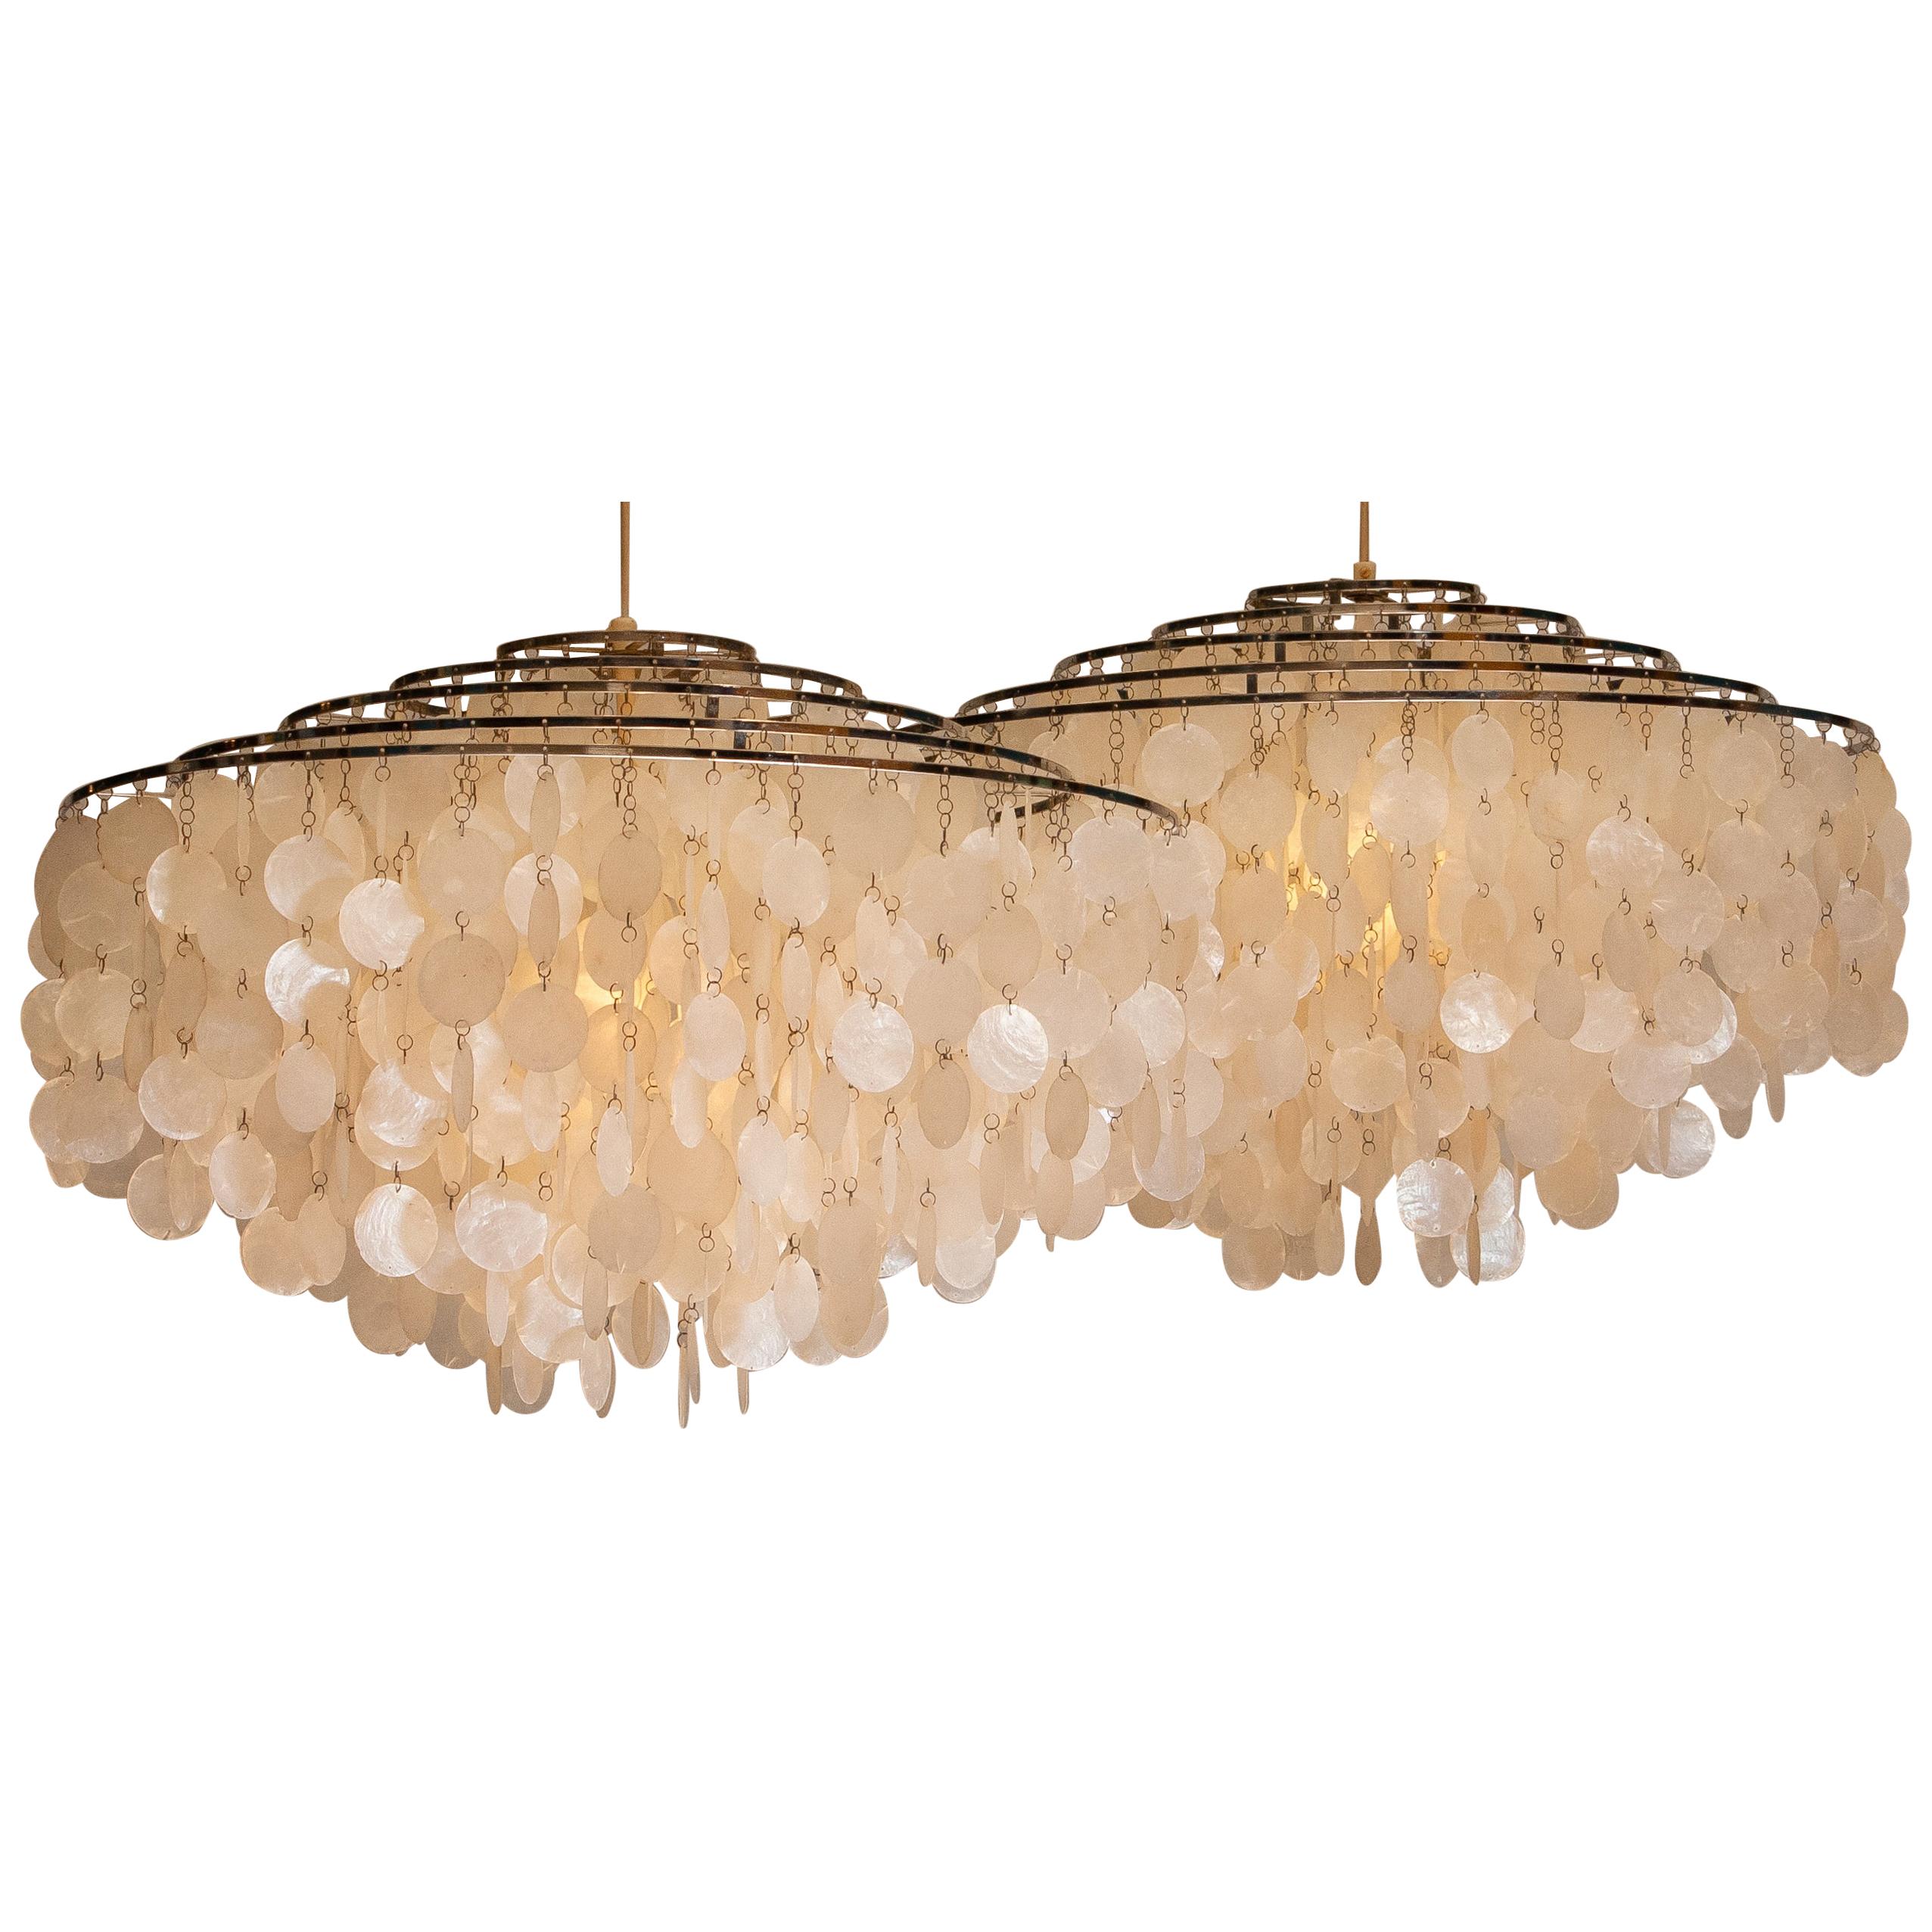 Pair of Extra Large Capiz Shell Chandeliers by Verner Panton for Luber AG. Swiss